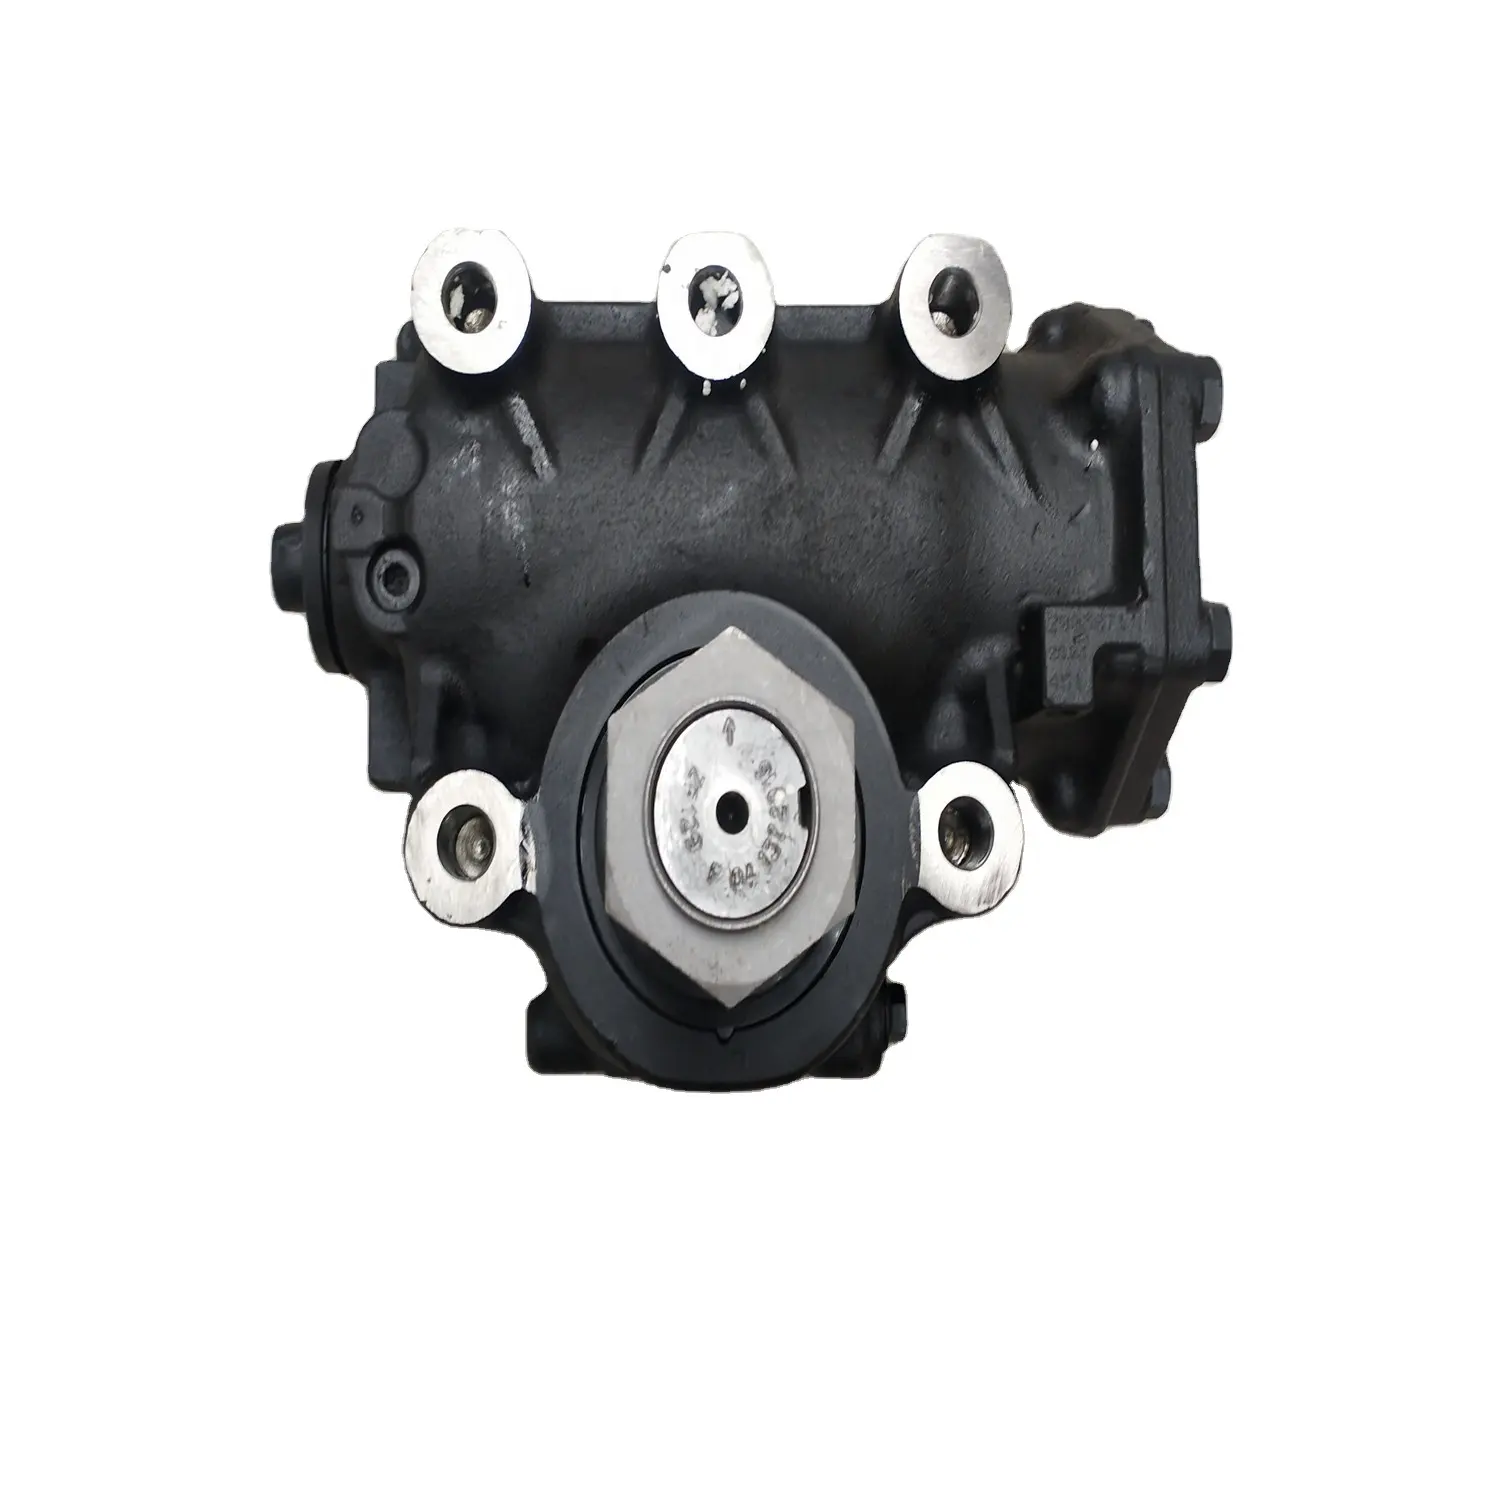 High-quality hot-selling Power steering 3401ZB3-001for Dongfeng truck parts Truck steering system